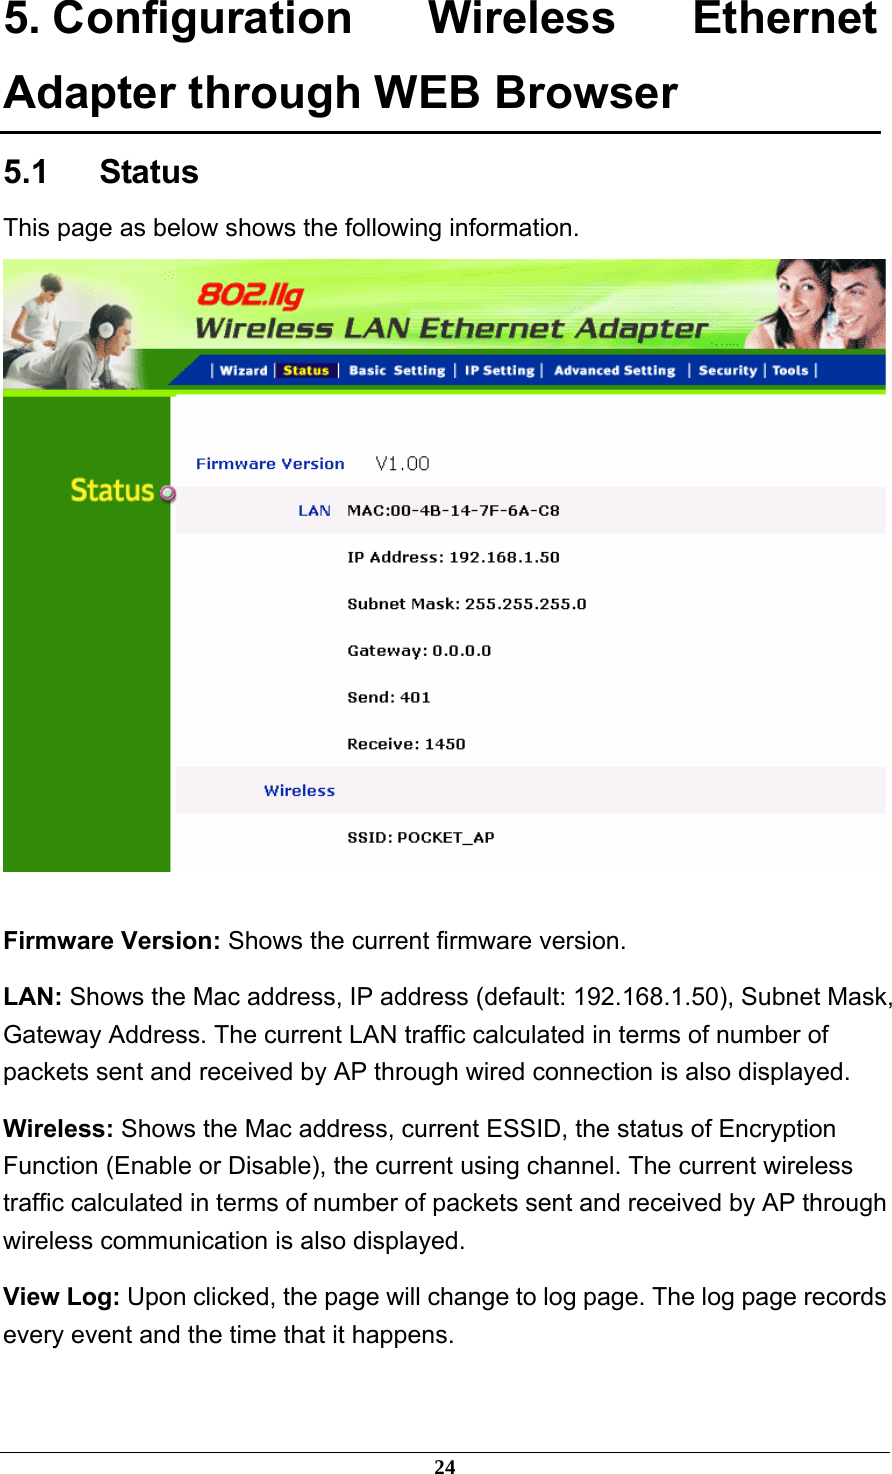 5. Configuration Wireless Ethernet Adapter through WEB Browser 5.1   Status This page as below shows the following information.   Firmware Version: Shows the current firmware version. LAN: Shows the Mac address, IP address (default: 192.168.1.50), Subnet Mask, Gateway Address. The current LAN traffic calculated in terms of number of packets sent and received by AP through wired connection is also displayed. Wireless: Shows the Mac address, current ESSID, the status of Encryption Function (Enable or Disable), the current using channel. The current wireless traffic calculated in terms of number of packets sent and received by AP through wireless communication is also displayed. View Log: Upon clicked, the page will change to log page. The log page records every event and the time that it happens. 24 